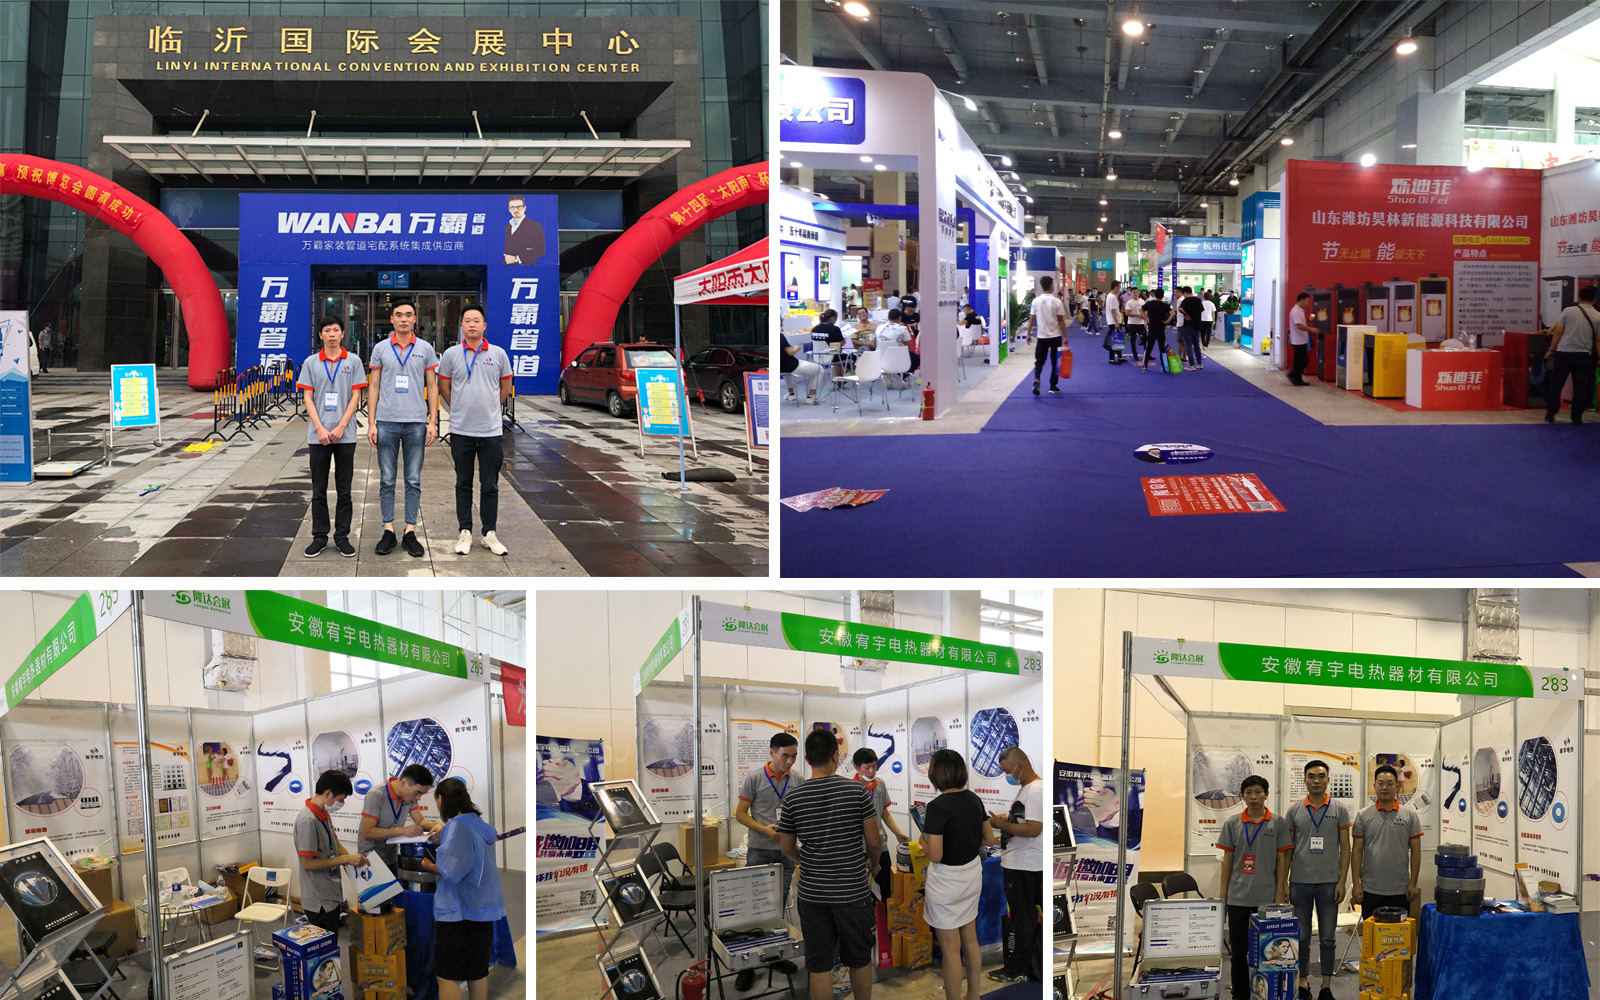 Shandong Linyi HVAC Exhibition was a complete success